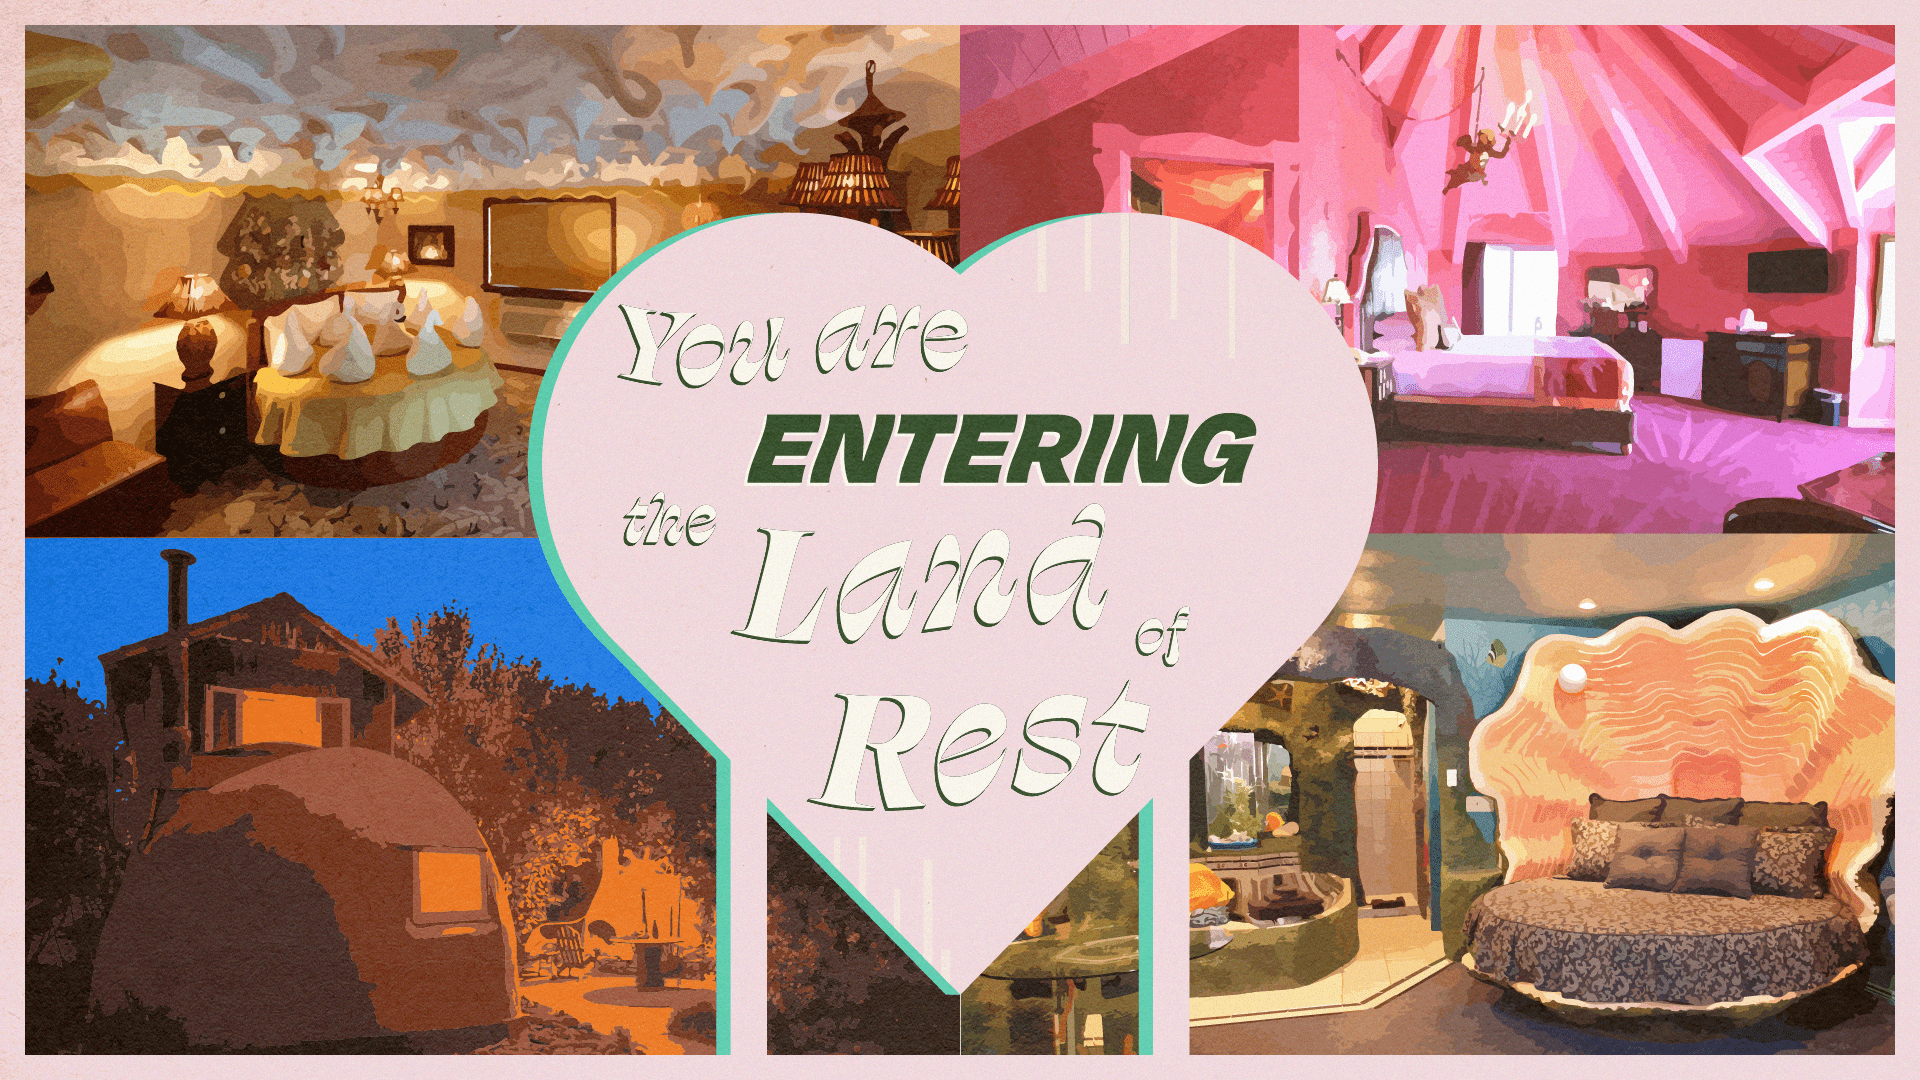 A retro sign indicates "You are entering the land of rest." Behind that, several kitschy hotel suites are featured, including a boot-shaped room and a sea-shell honeymoon bed.